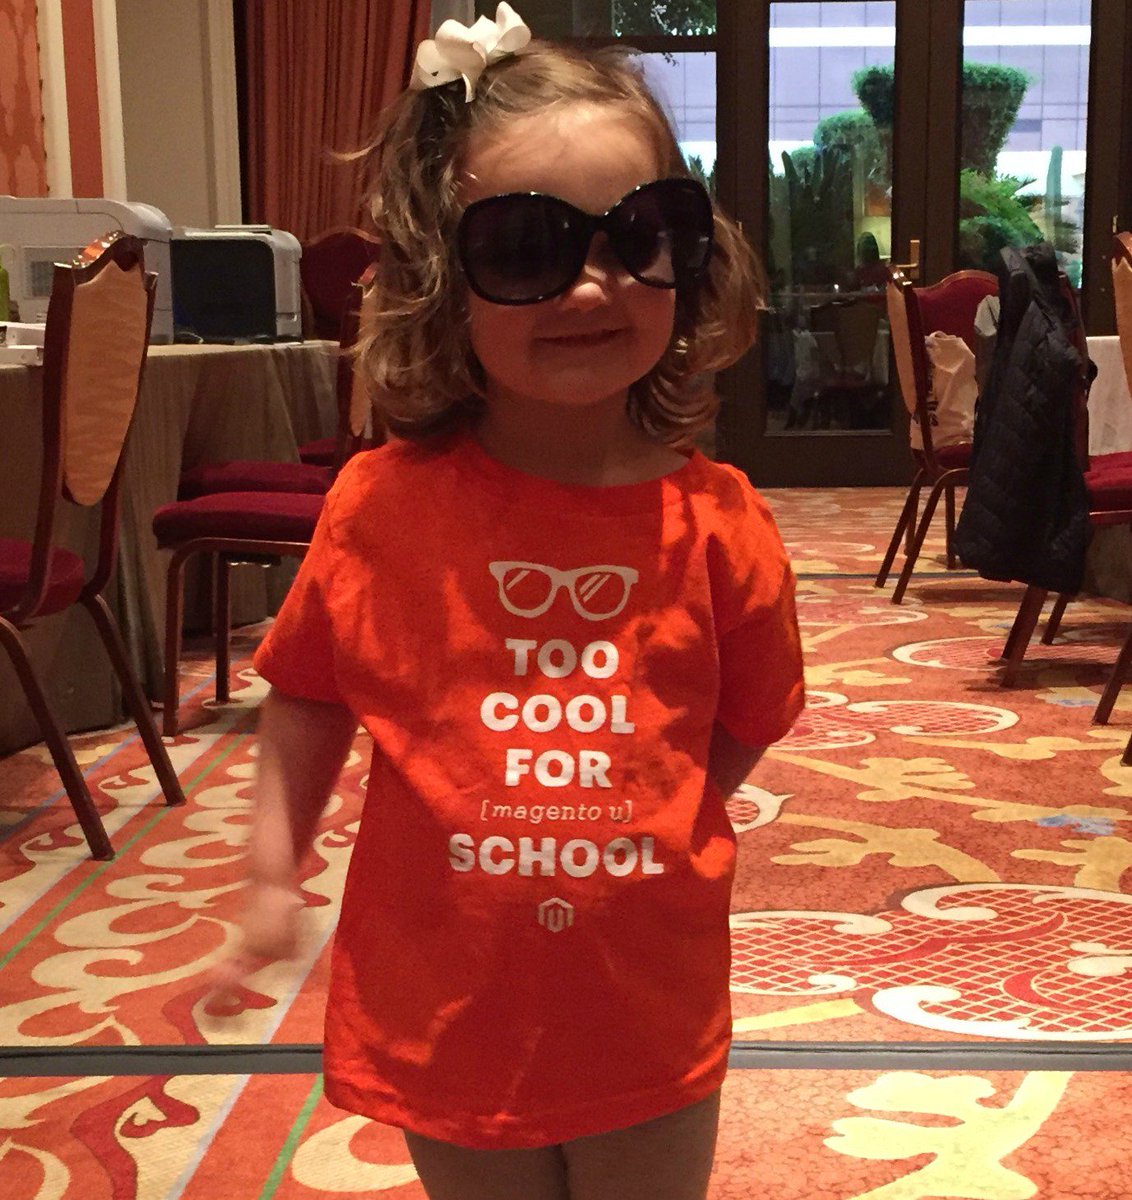 magento: Stop by the #MagentoImagine swag store in between sessions and grab your little one a little souvenir. https://t.co/zwhp8C1GQ8